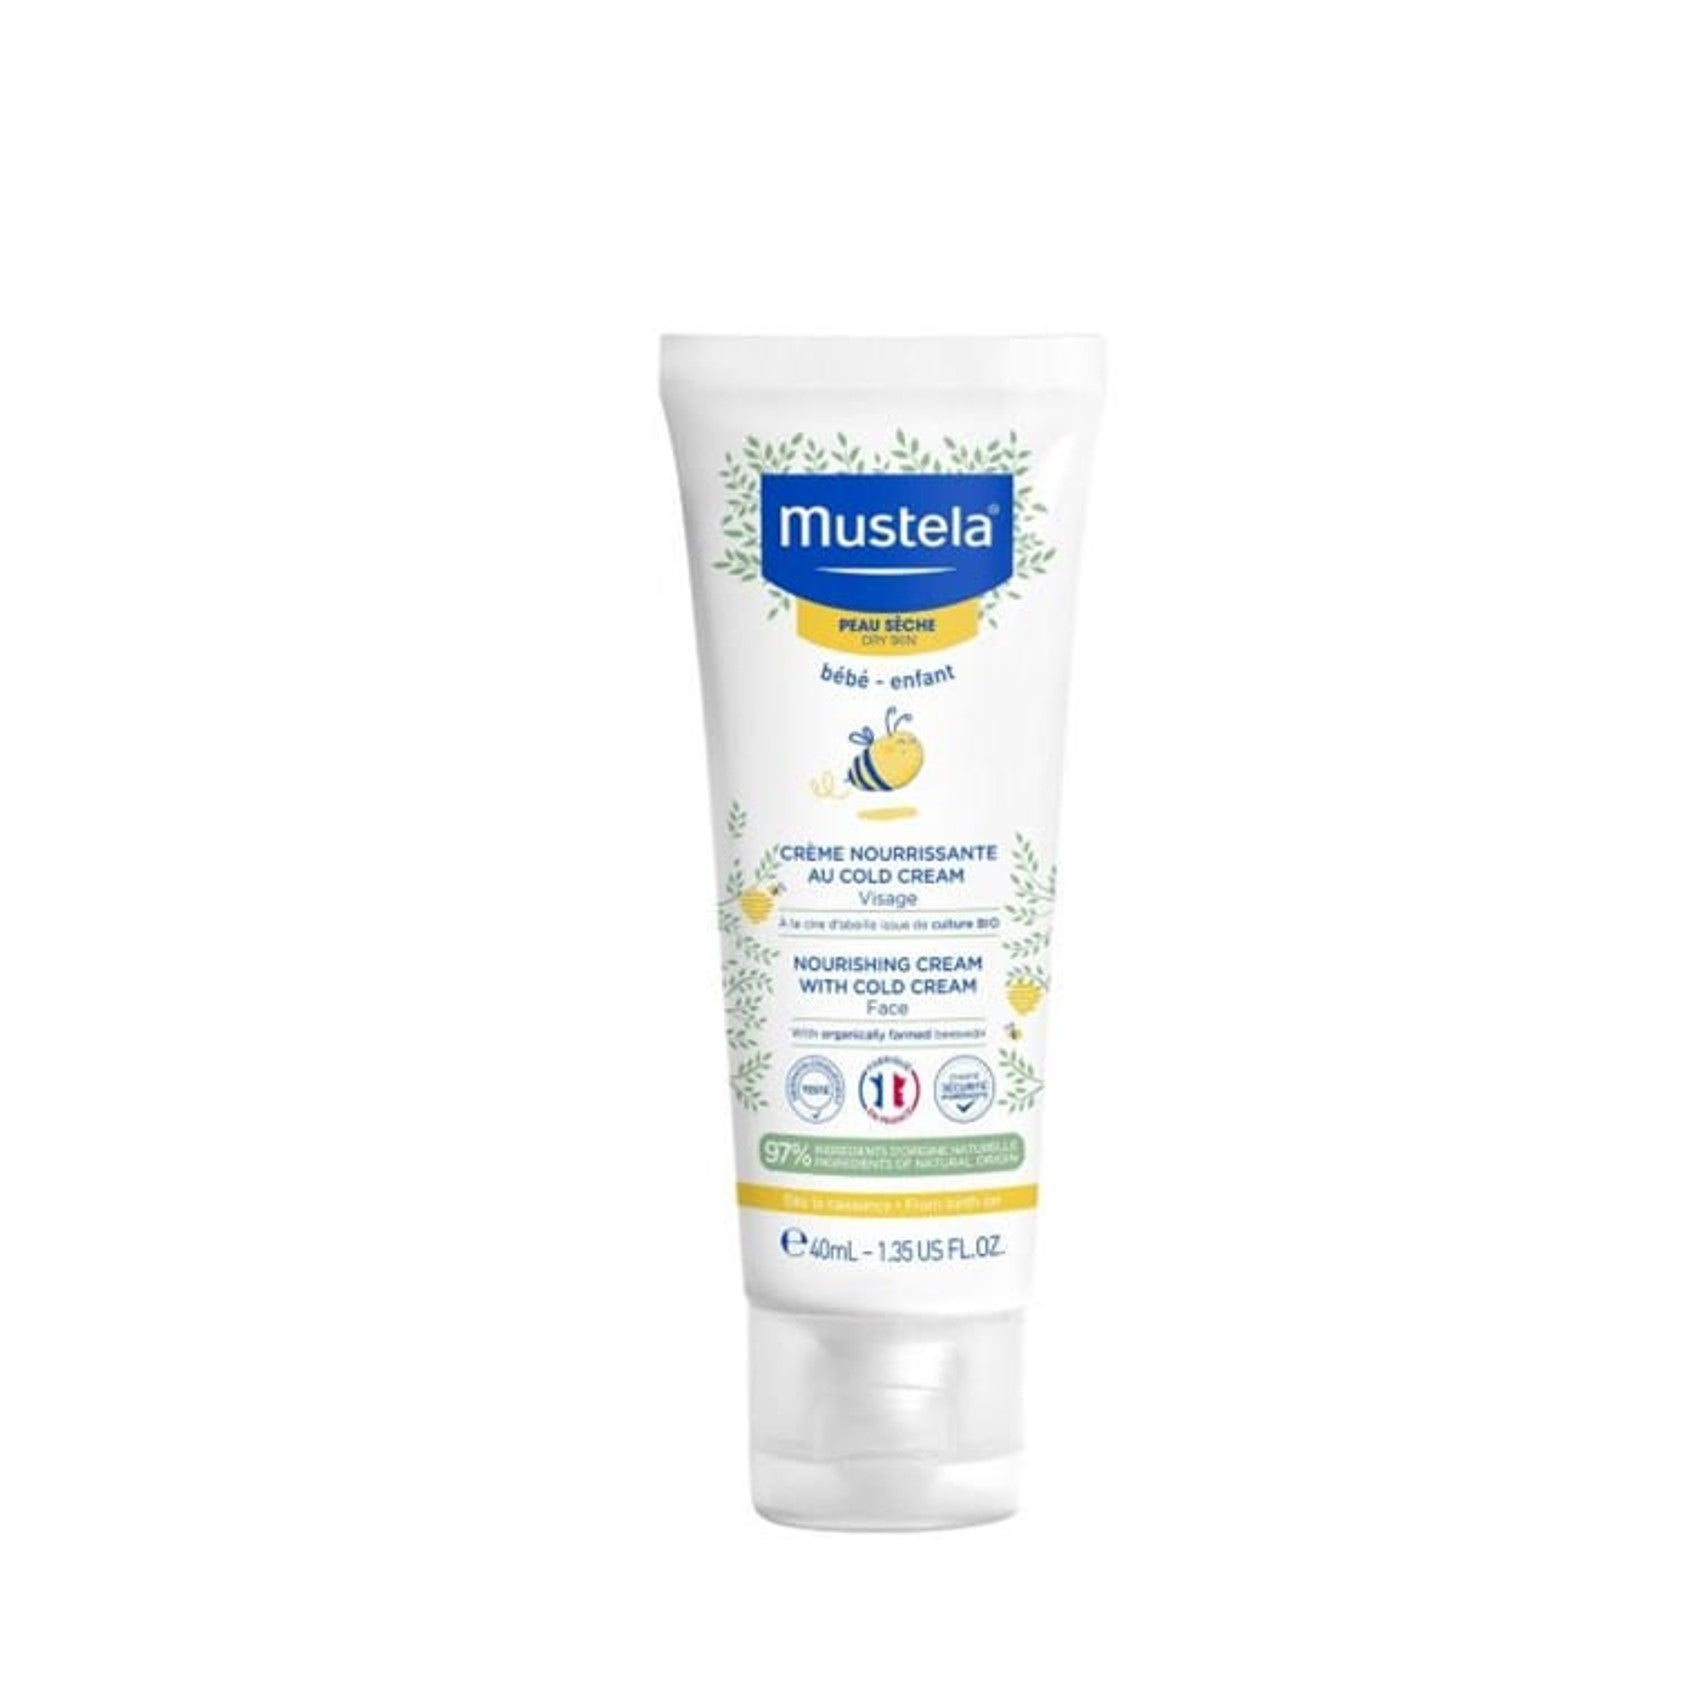 Mustela Nourishing Cream With Cold Cream 40ml- Lillys Pharmacy and Health Store